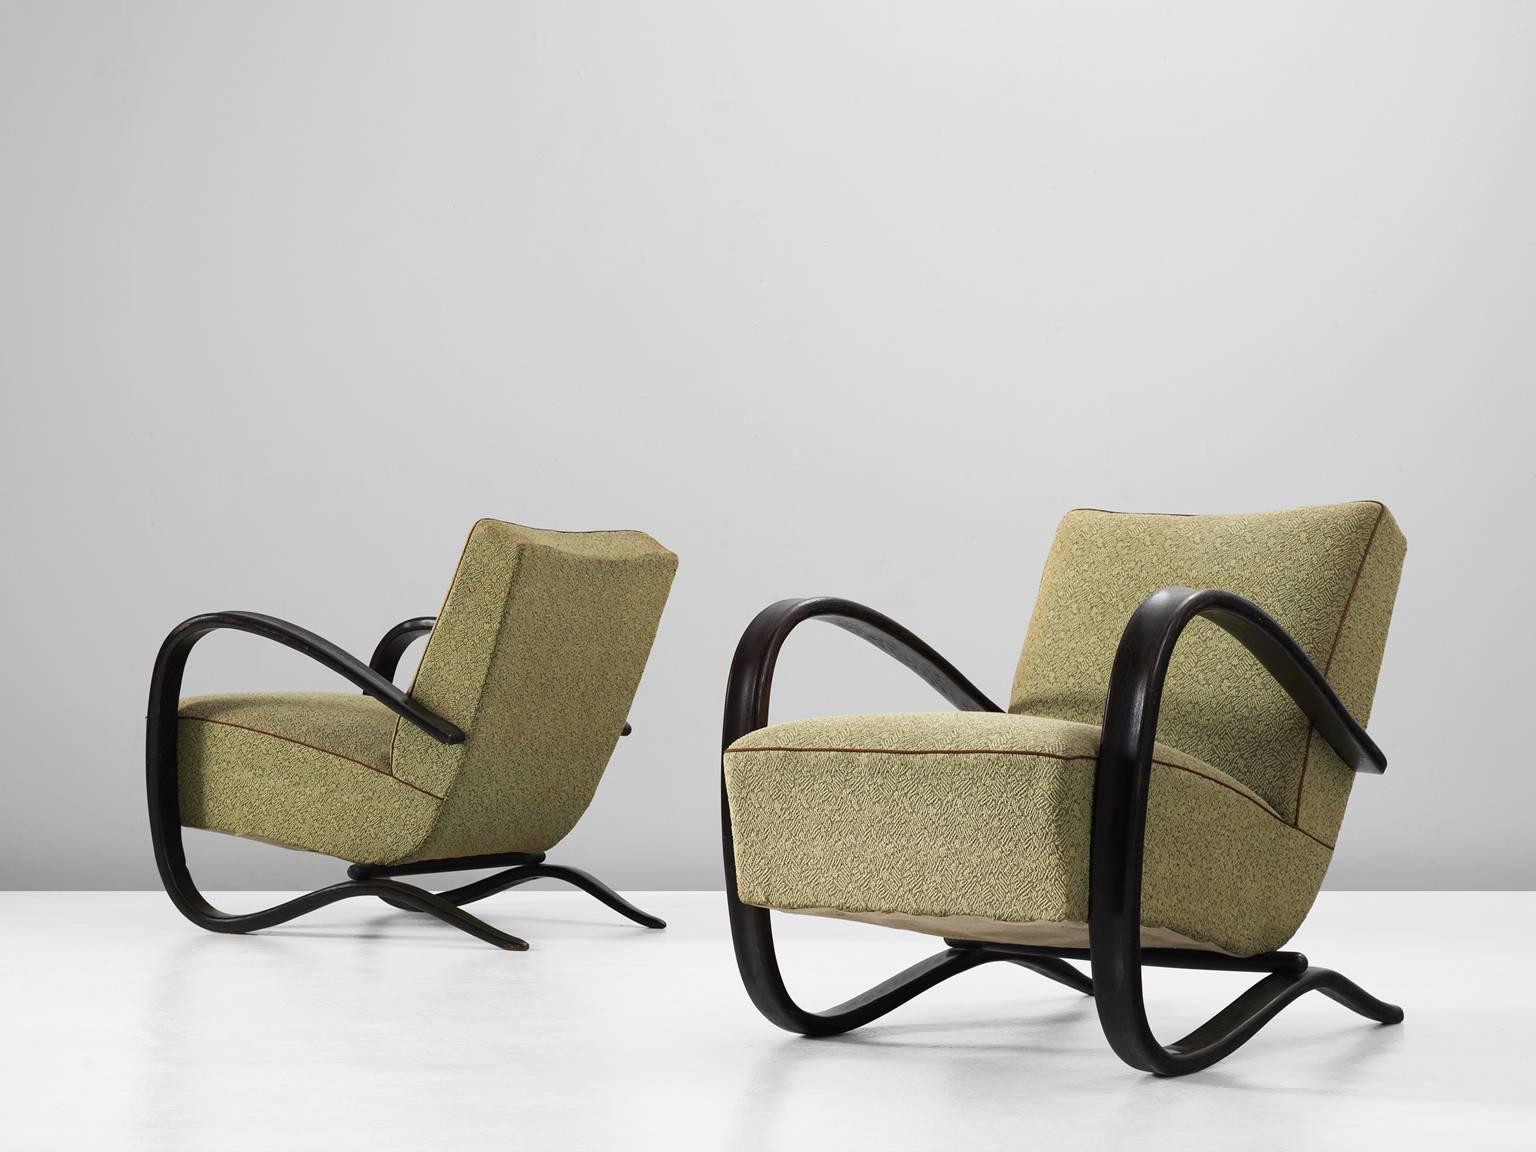 Pair of armchairs, in beech and fabric, by Jindrich Halabala, Czech Republic, 1930s. 

These chairs have a very dynamic appearance, due the curved base that ends fluently in the armrests. The dark brown stained wood nicely contrast to the green